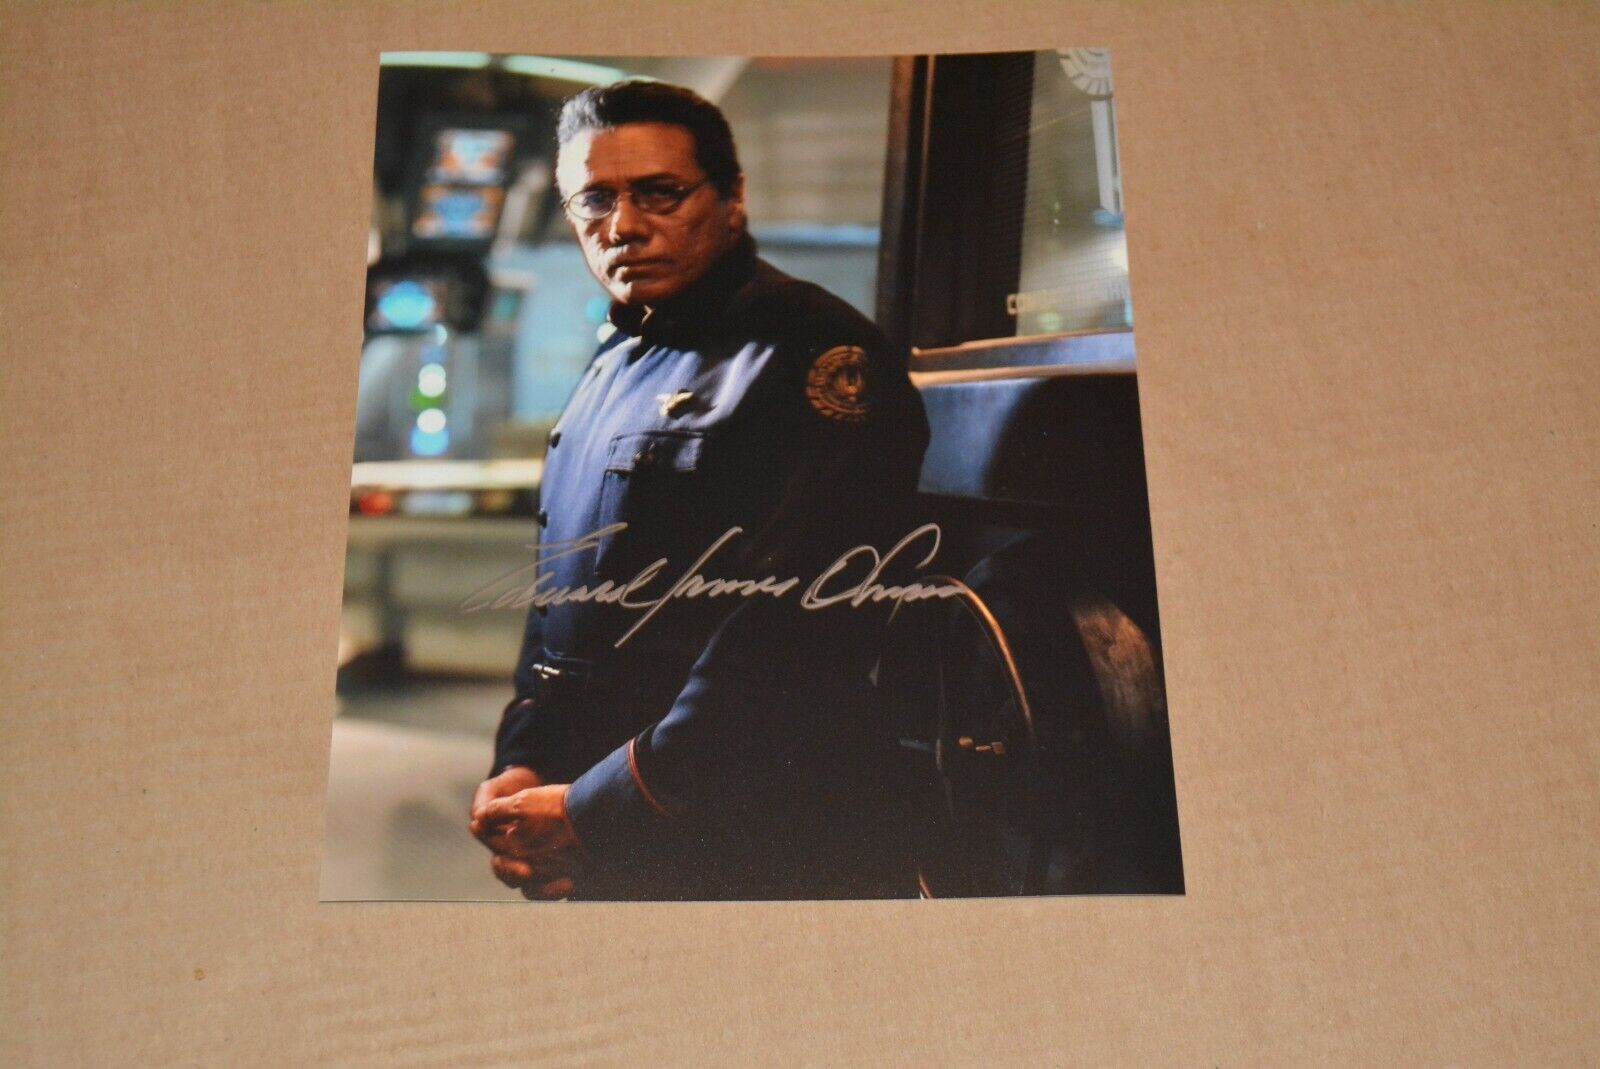 EDWARD JAMES OLMOS signed autograph In Person 8x10 20x25 cm BATTLESTAR GALACTICA